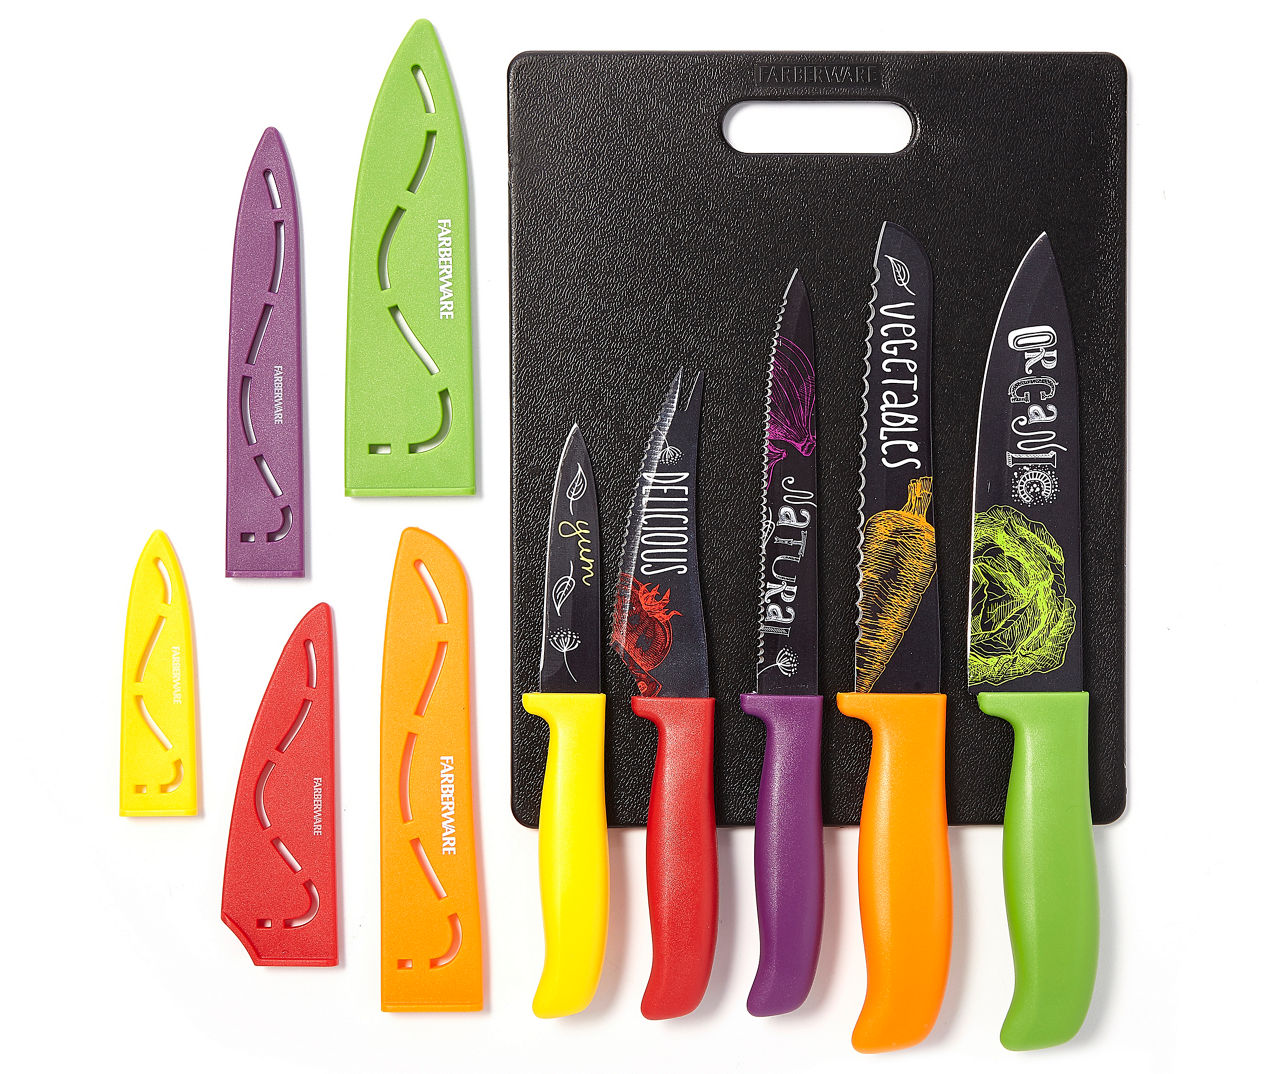 Farberware Stainless Steel Knife Set with Cutting Board, 11-Piece